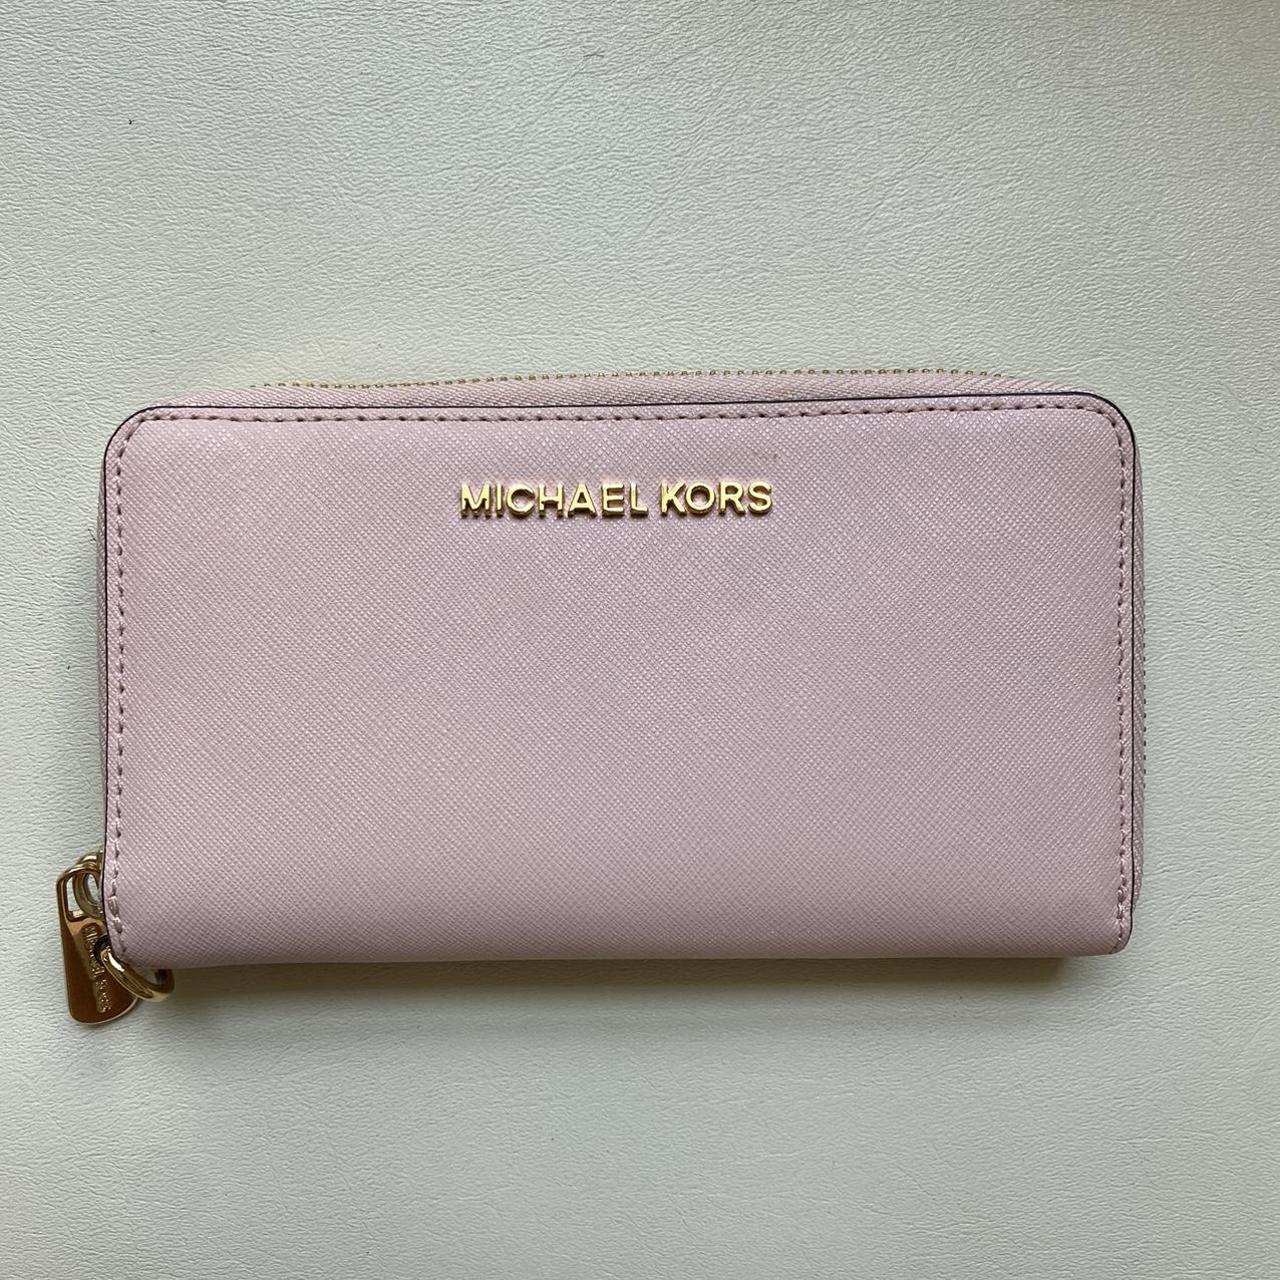 Michael Kors Jet Set Travel Logo Double Gusset Wallet Wristlet Dusty Rose  Blossom Pink Leather Clutch Listed By Grand Slam Fashion Tradesy   xn90absbknhbvgexnp1ai443